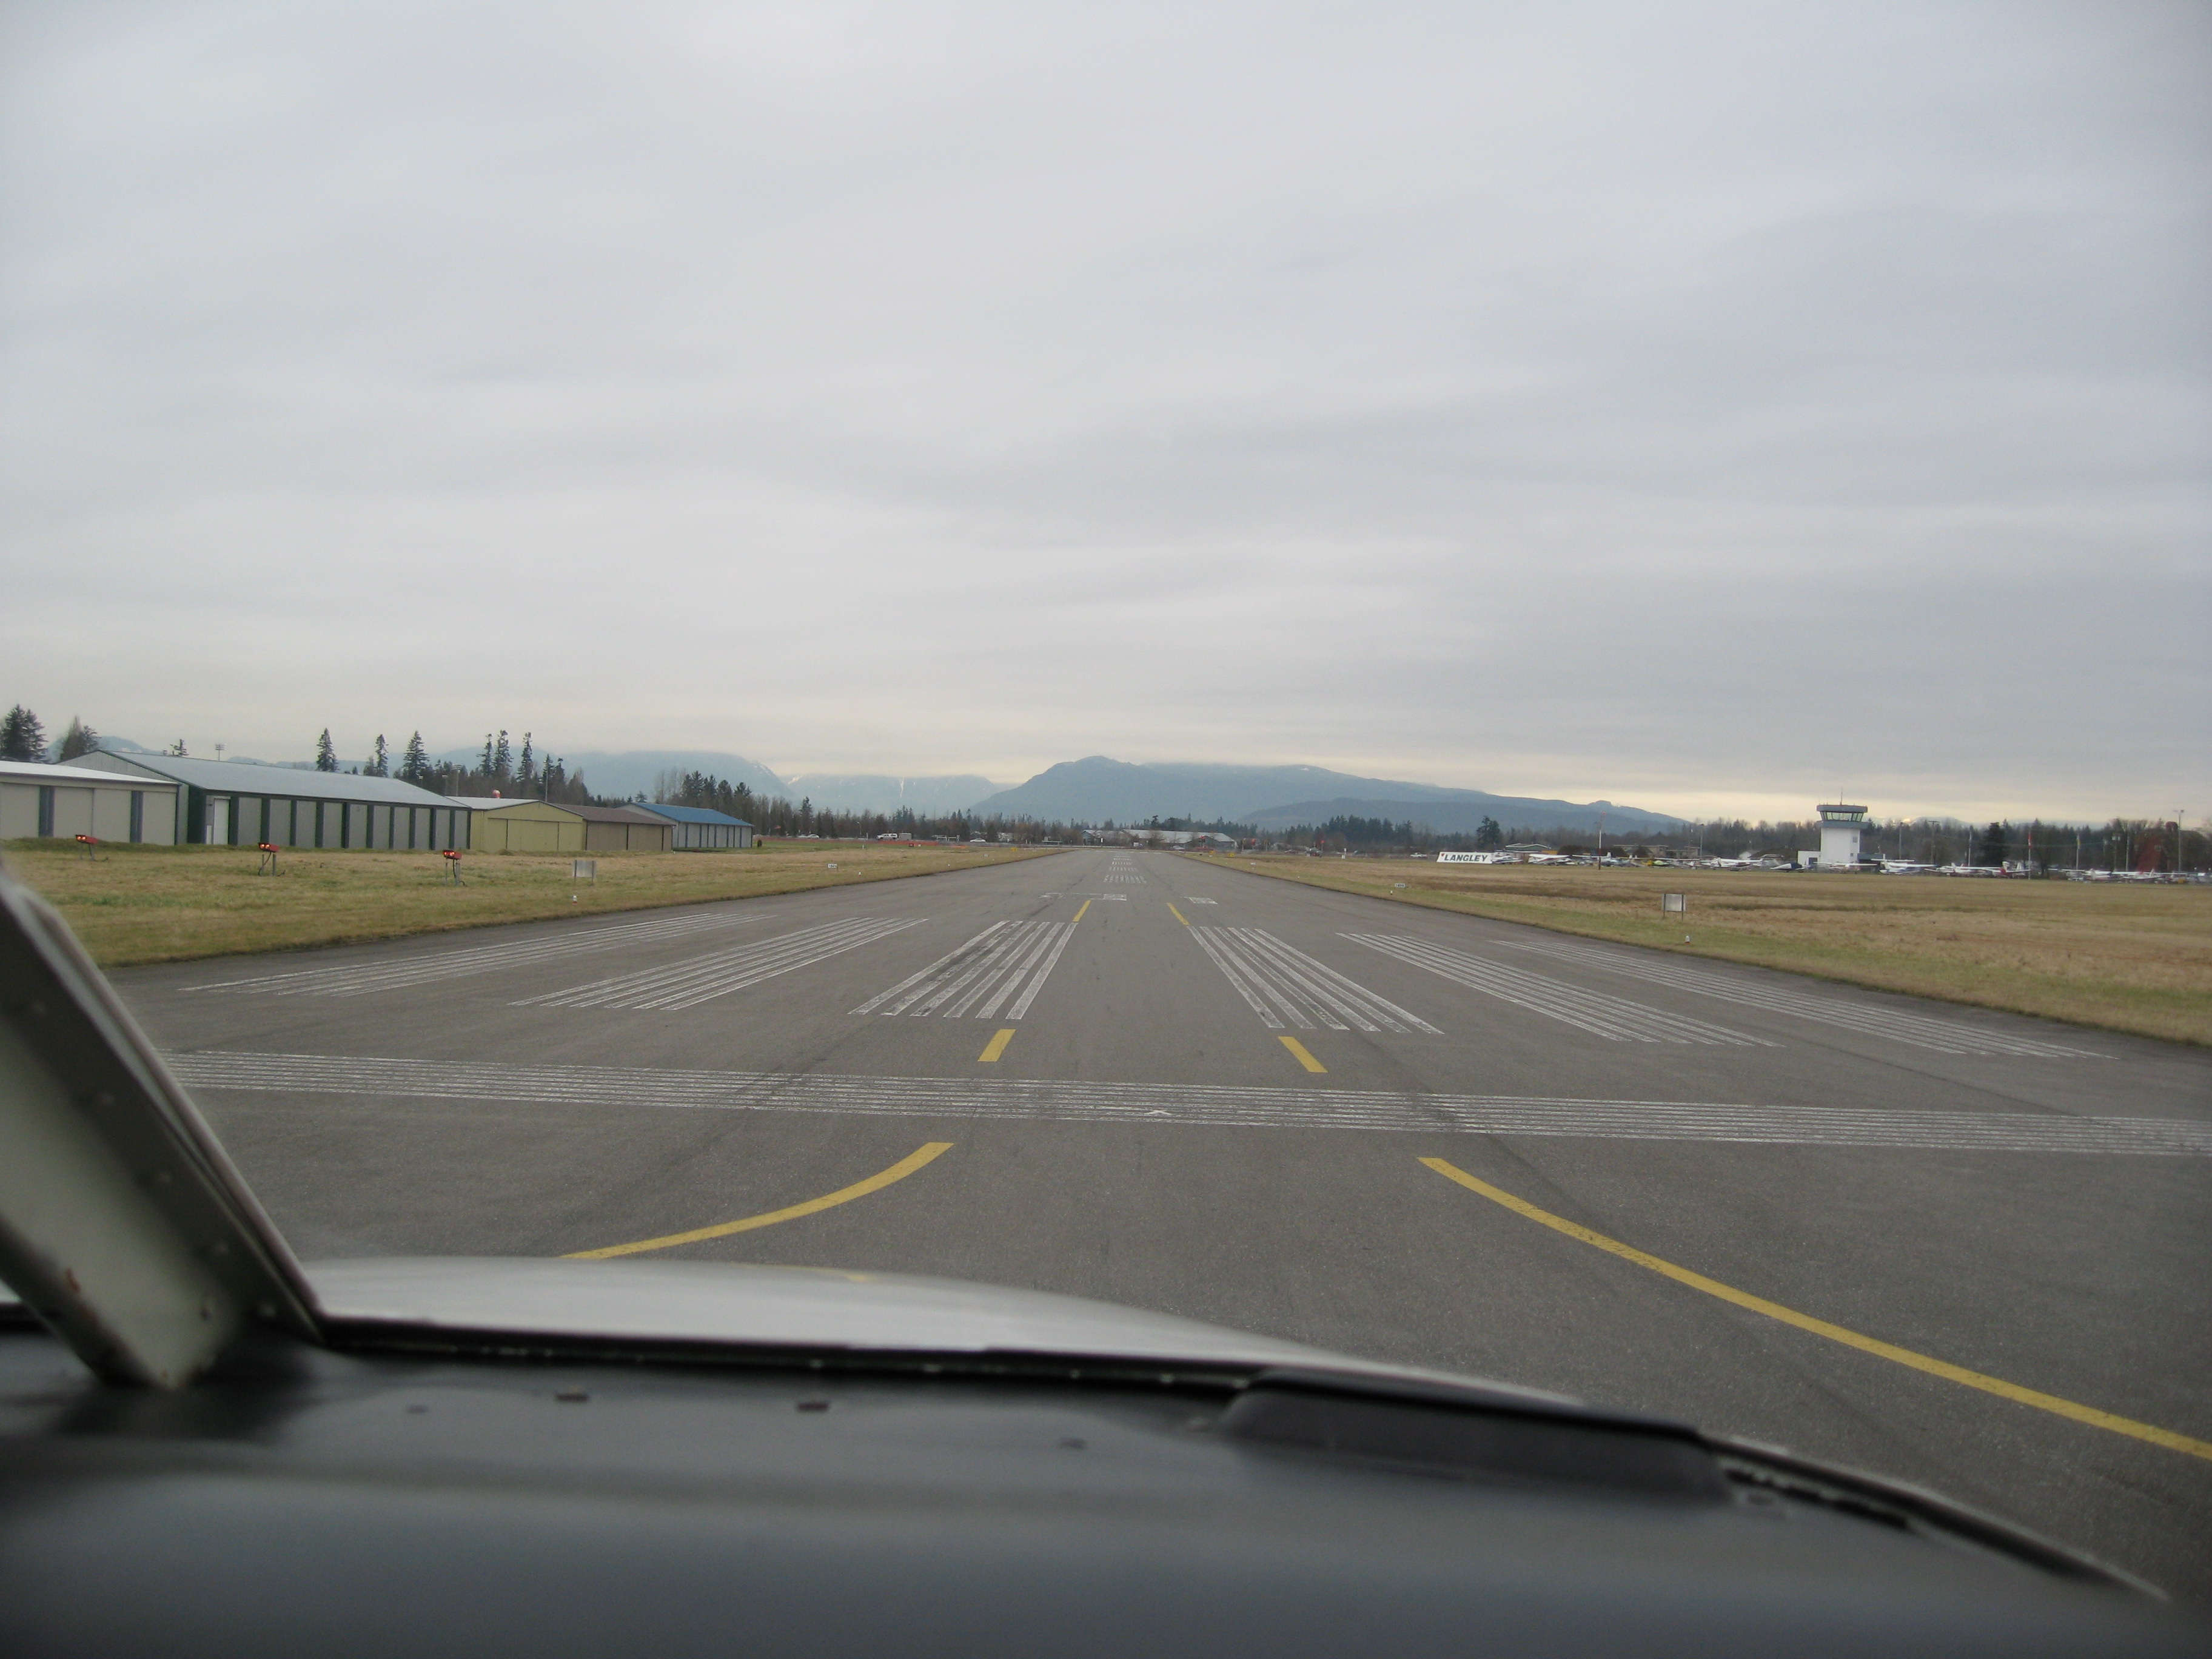 Seneca lined up for departure Runway 01, Photo by Justin Chung, February, 2008, Langley Flying School.